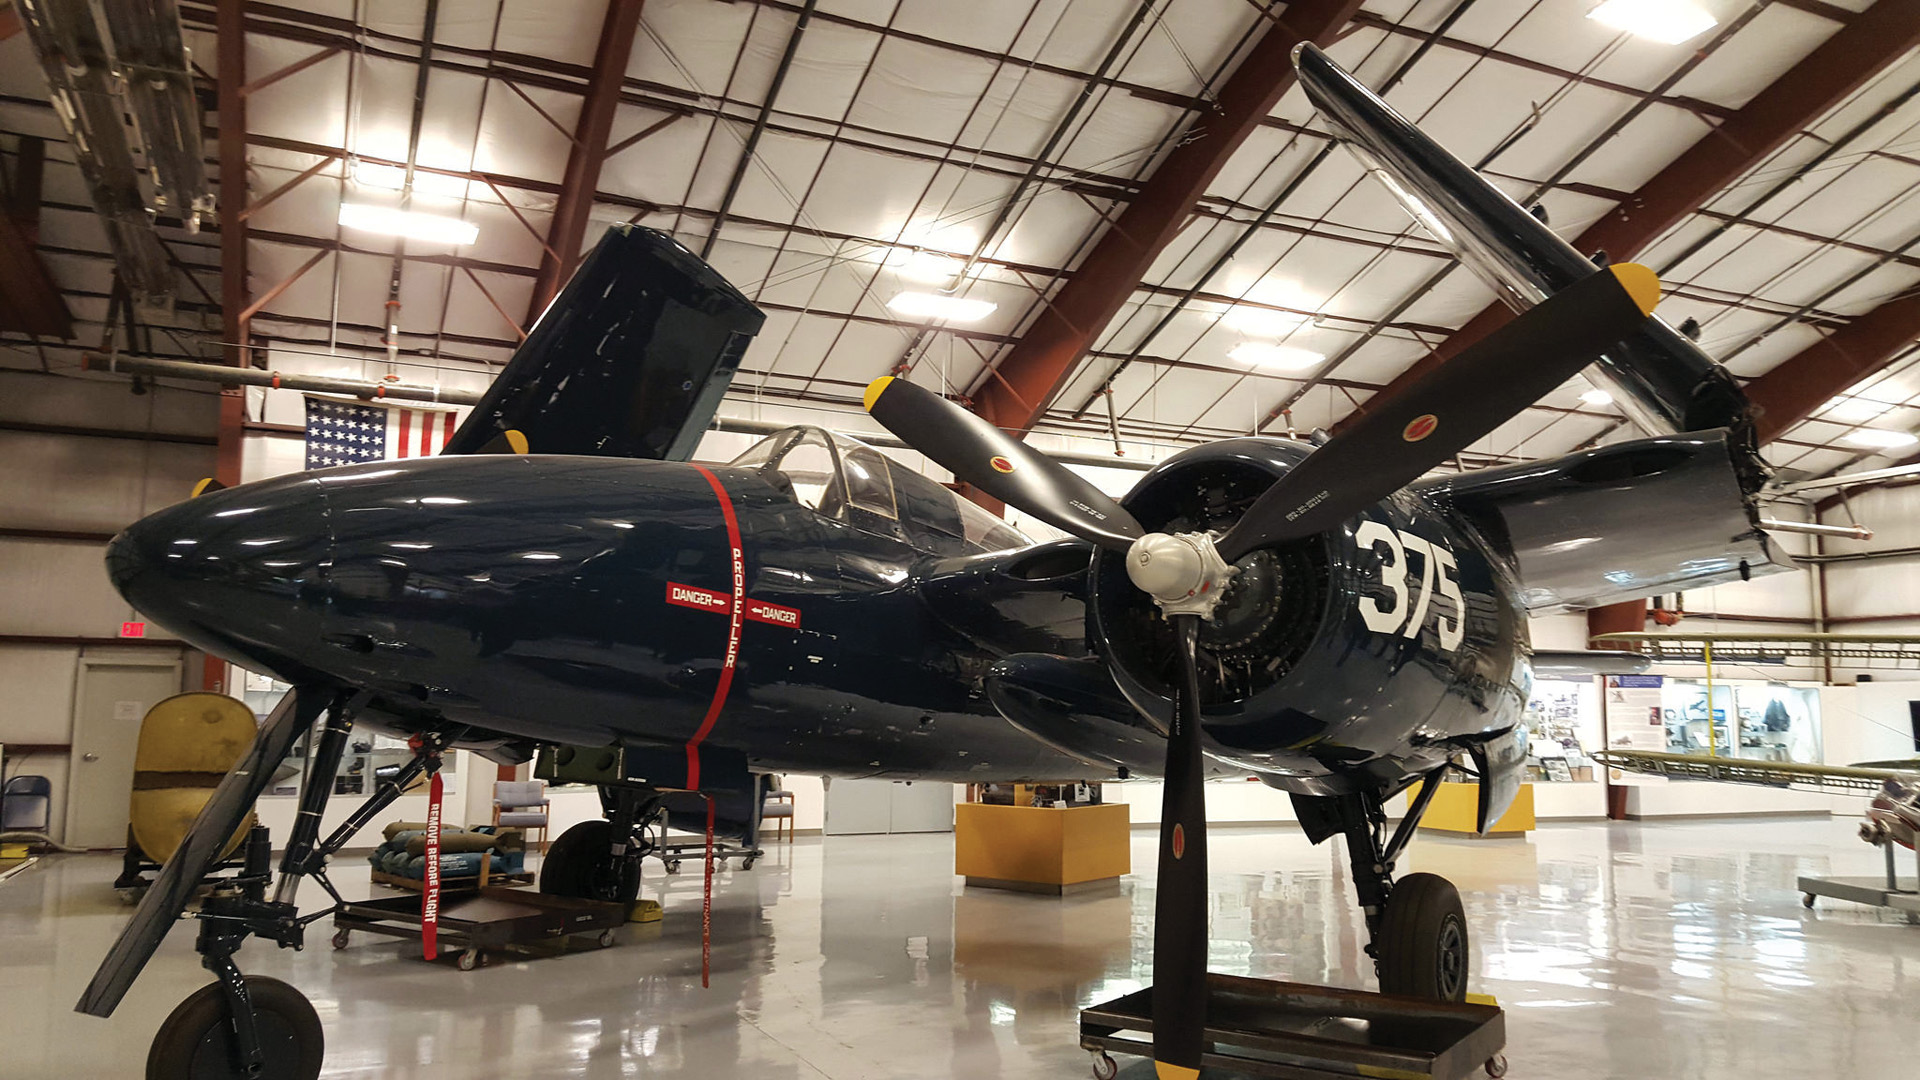 This sleek Grumman F7F Tigercat, which served with the Navy and Marines from late war until 1954, presages the coming of jet fighters.